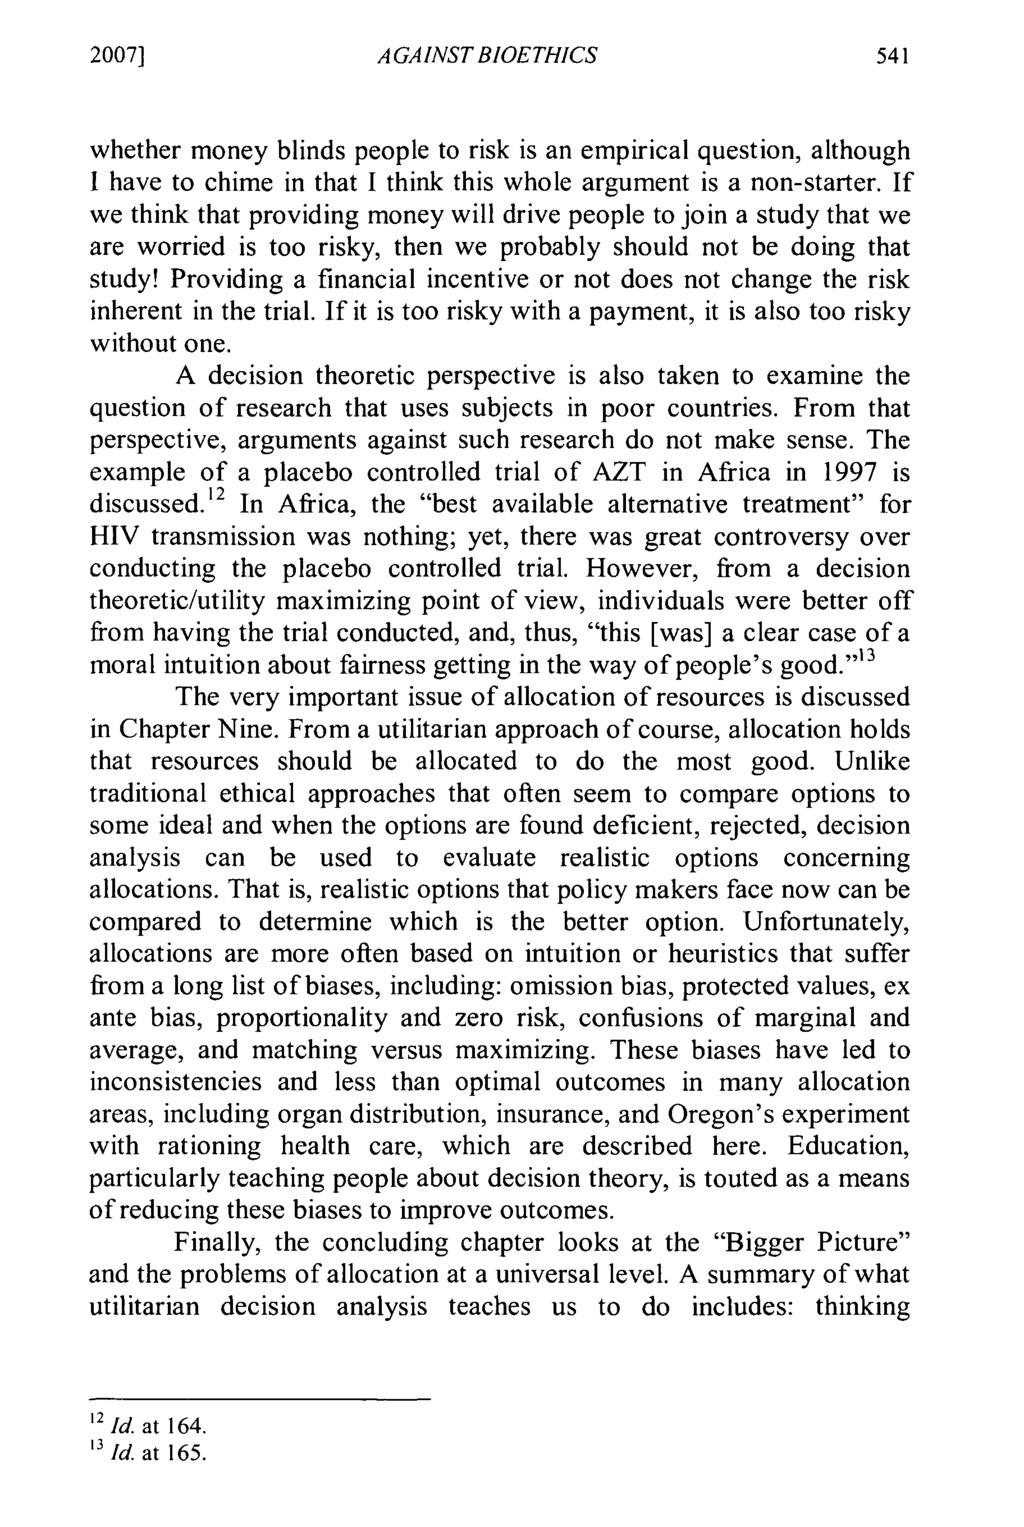 2007] AGAINST BIOETHICS whether money blinds people to risk is an empirical question, although I have to chime in that I think this whole argument is a non-starter.